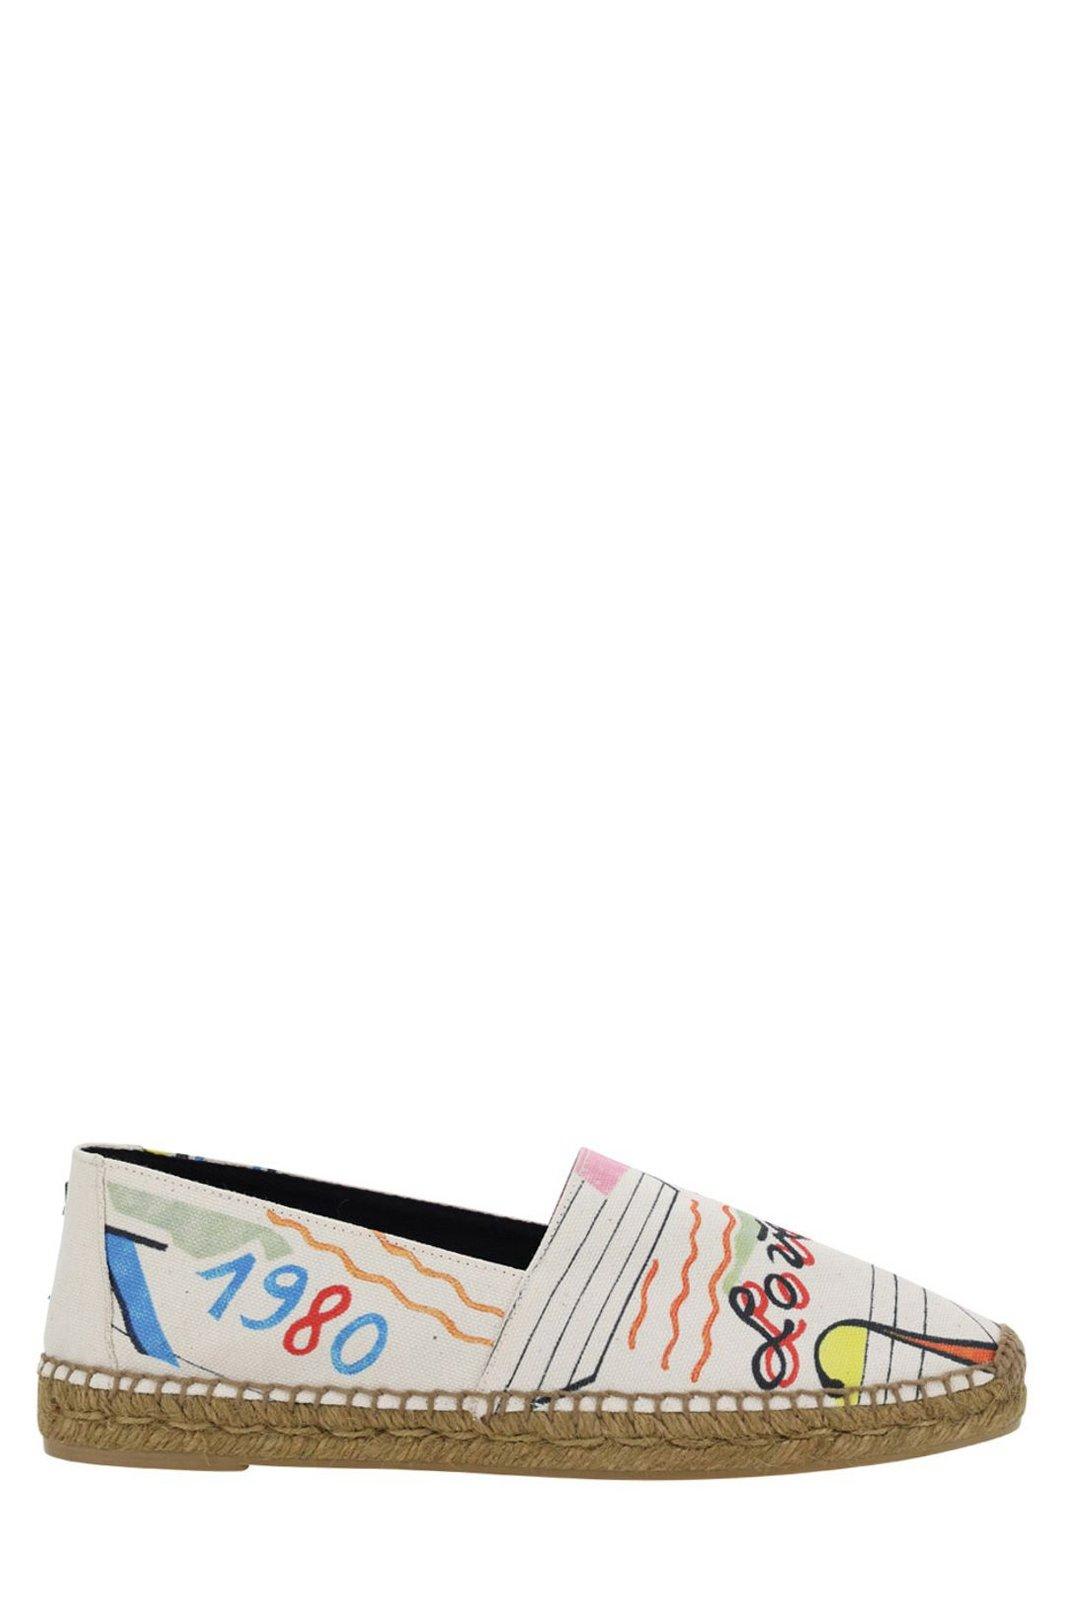 Abstract Pattern Printed Espadrilles